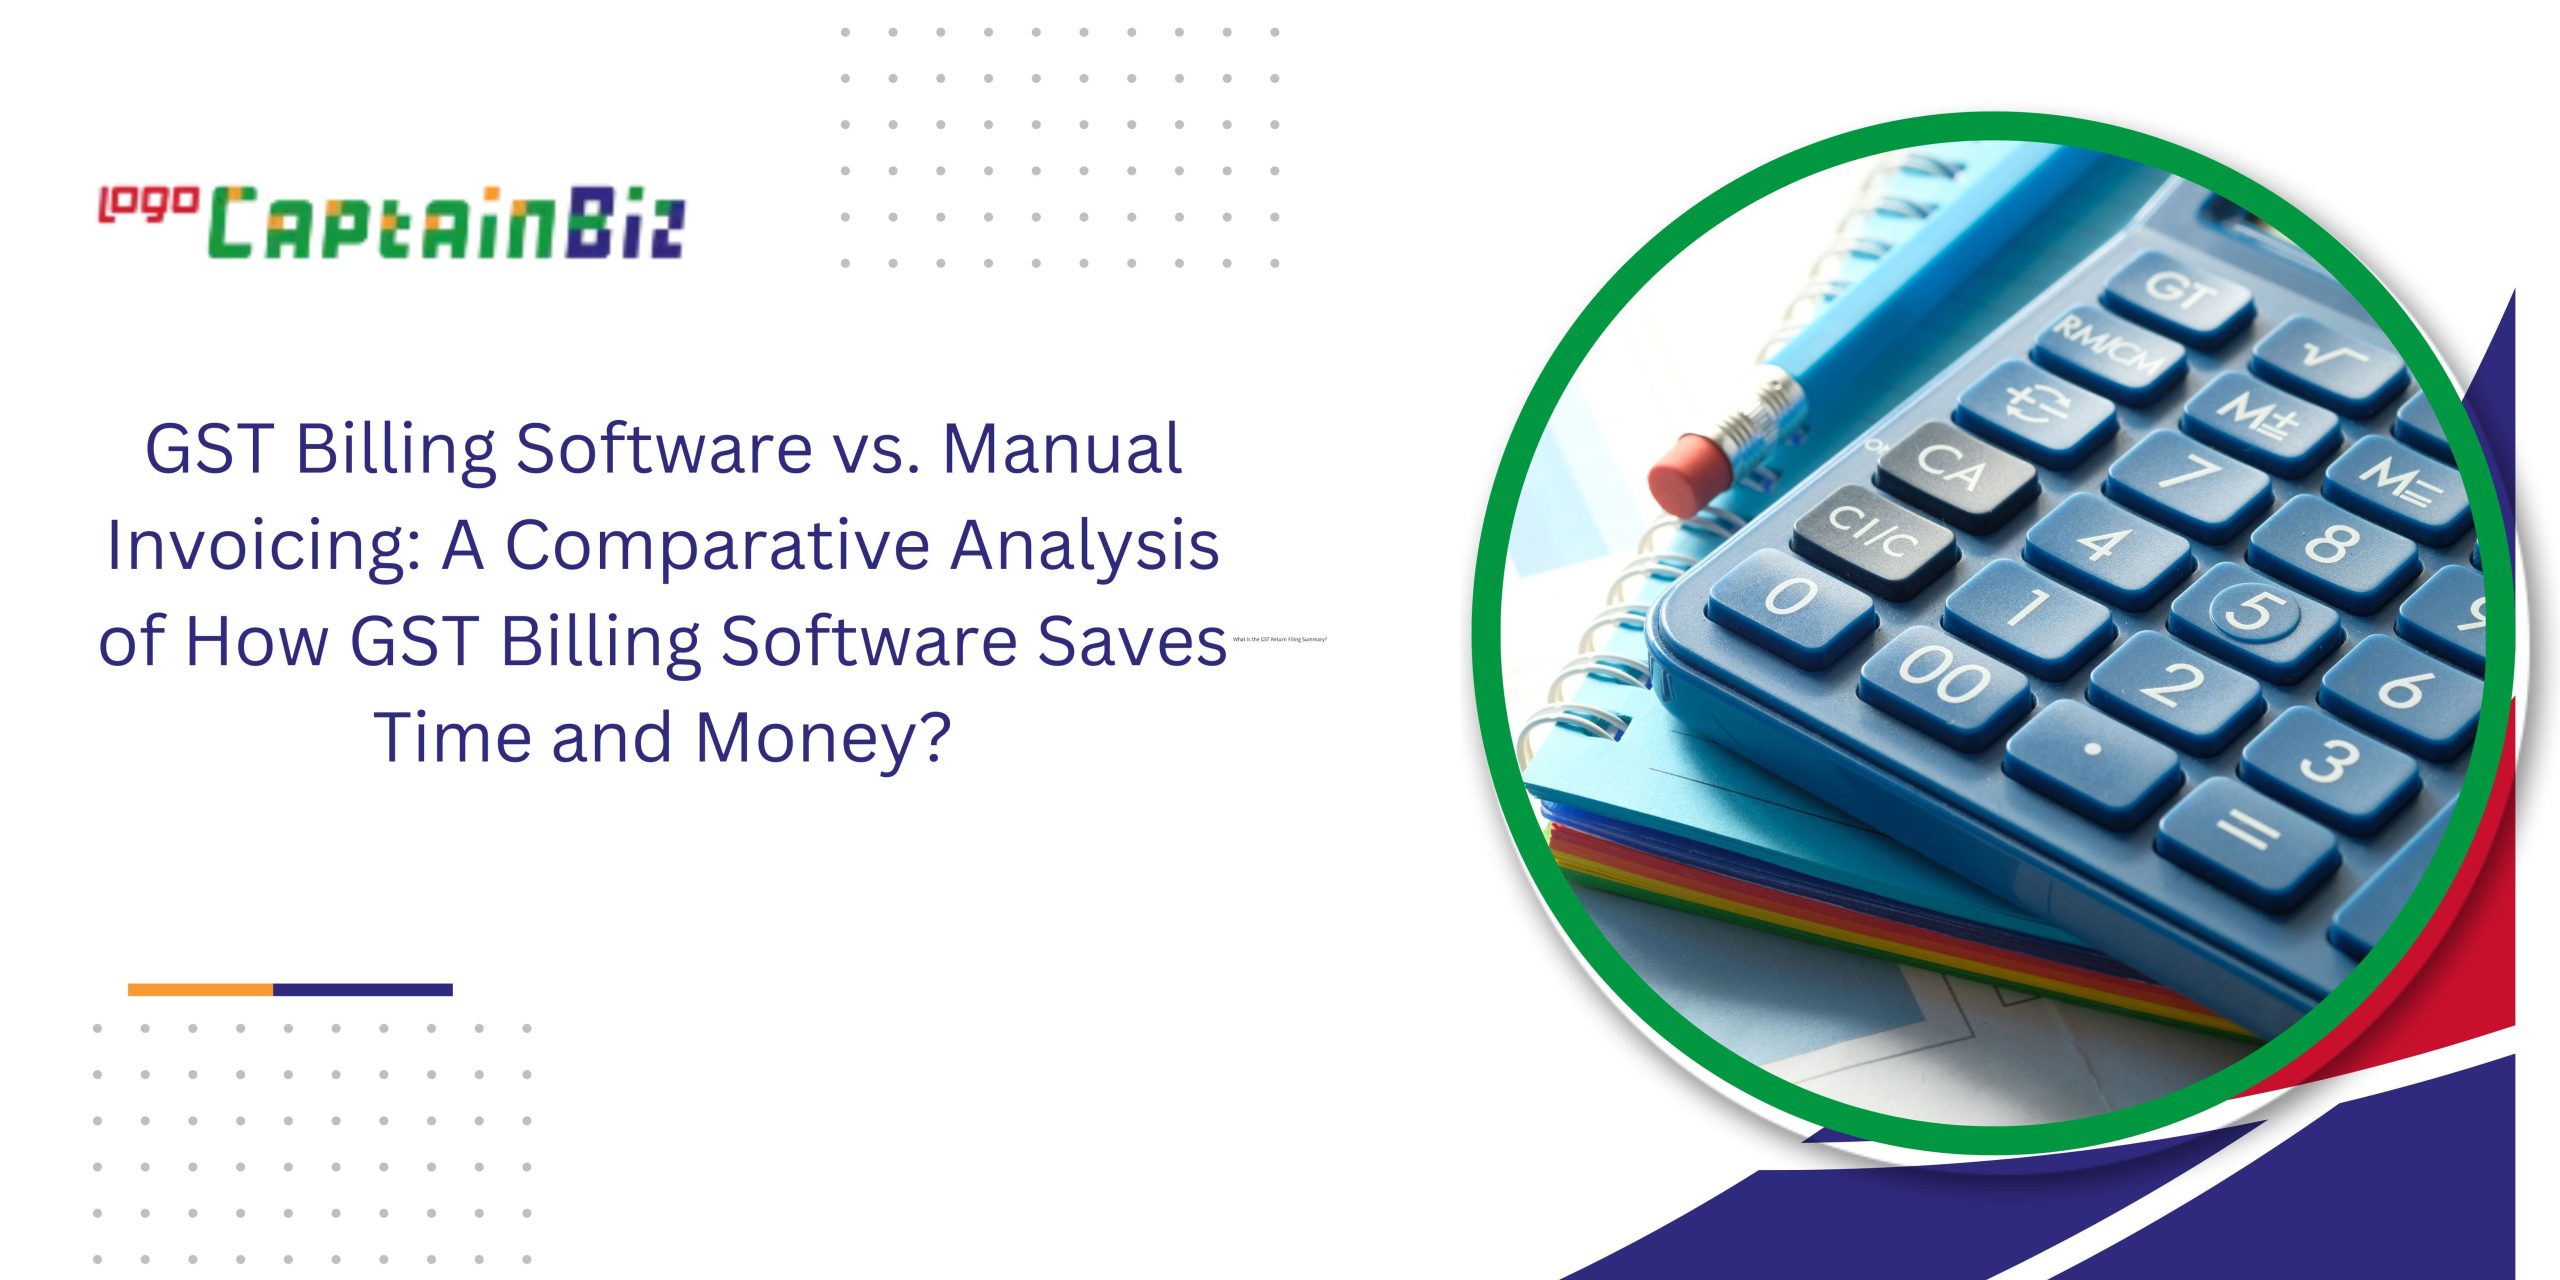 captainbiz gst billing software vs manual invoicing a comparative analysis of how gst billing software saves time and money